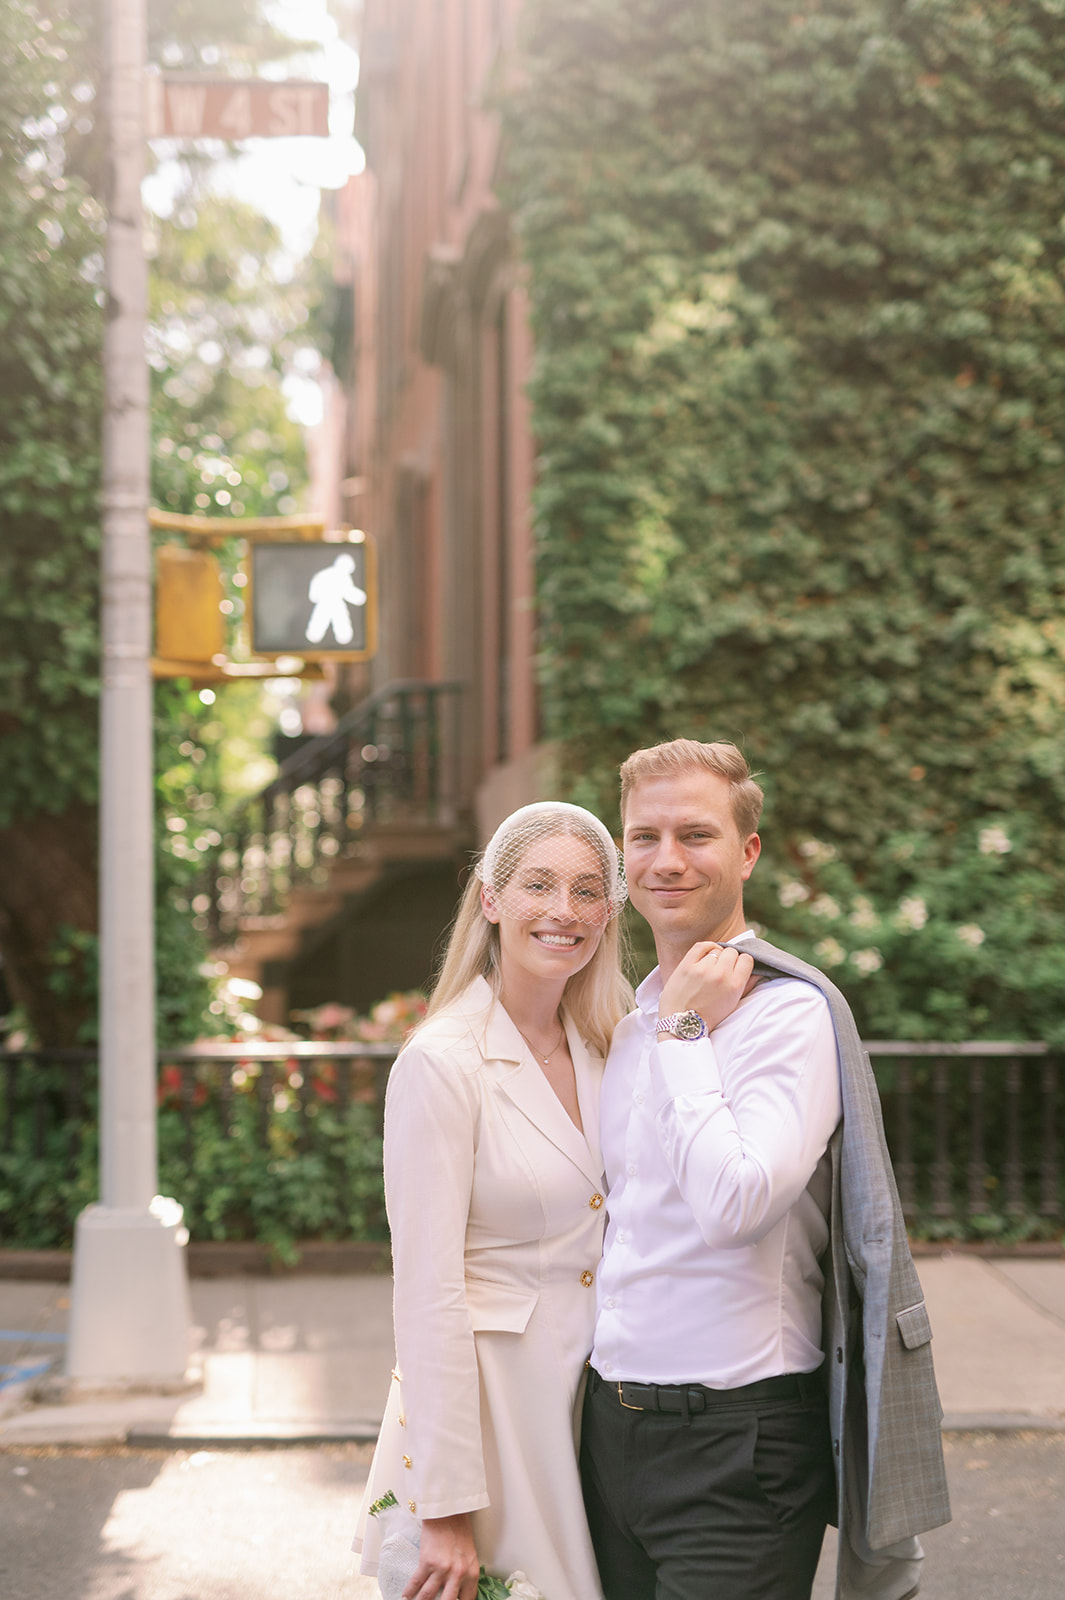 Bride and groom capture classic romance in Greenwich Village street, a brick brownstone draped in greenery providing an iconic New York backdrop.